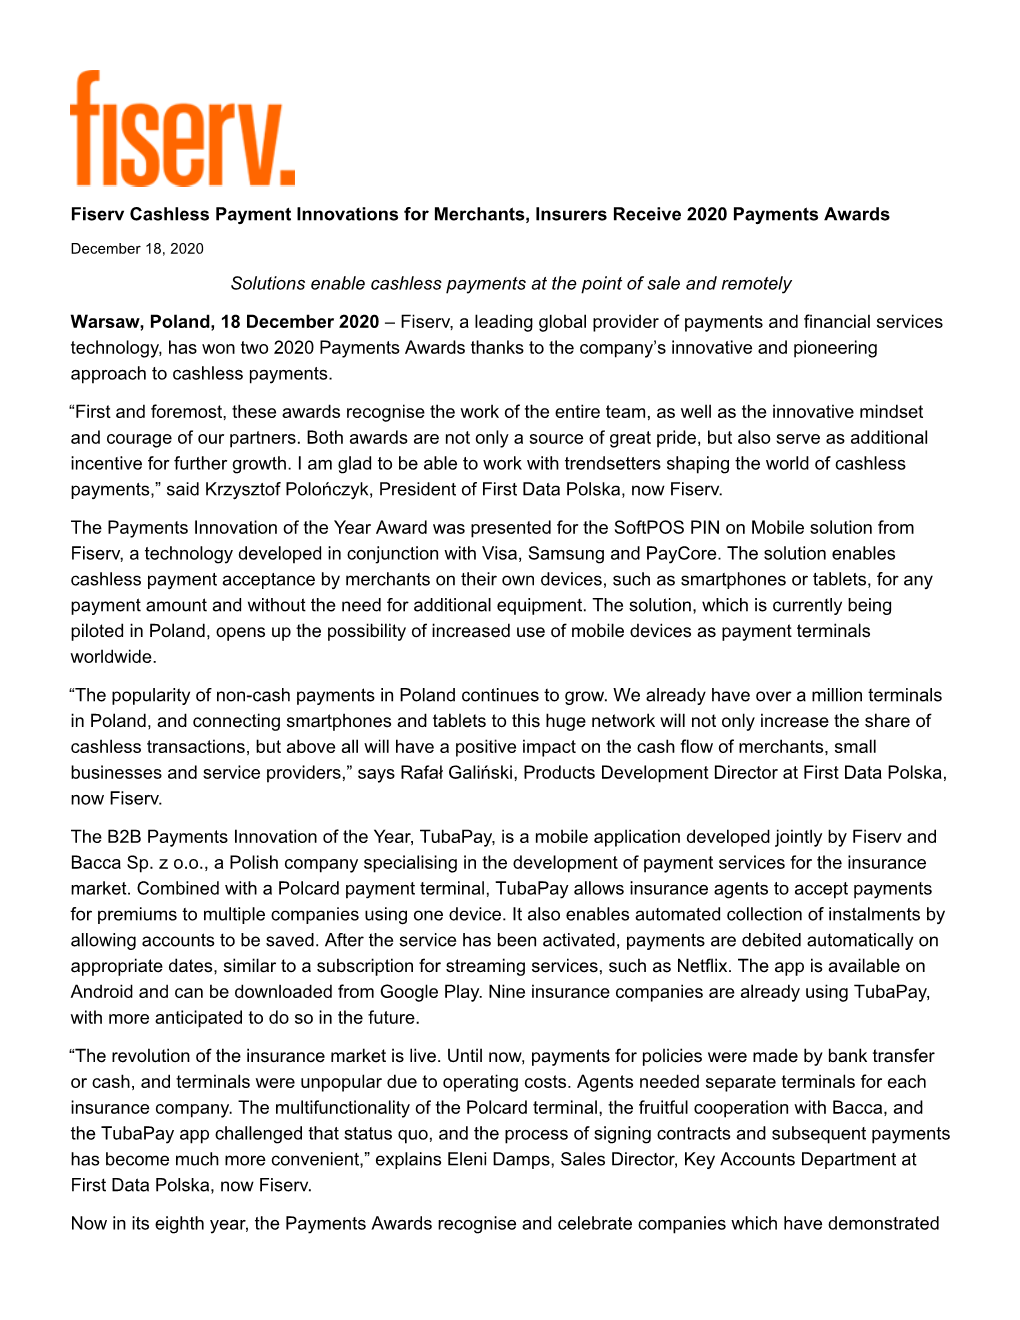 Fiserv Cashless Payment Innovations for Merchants, Insurers Receive 2020 Payments Awards